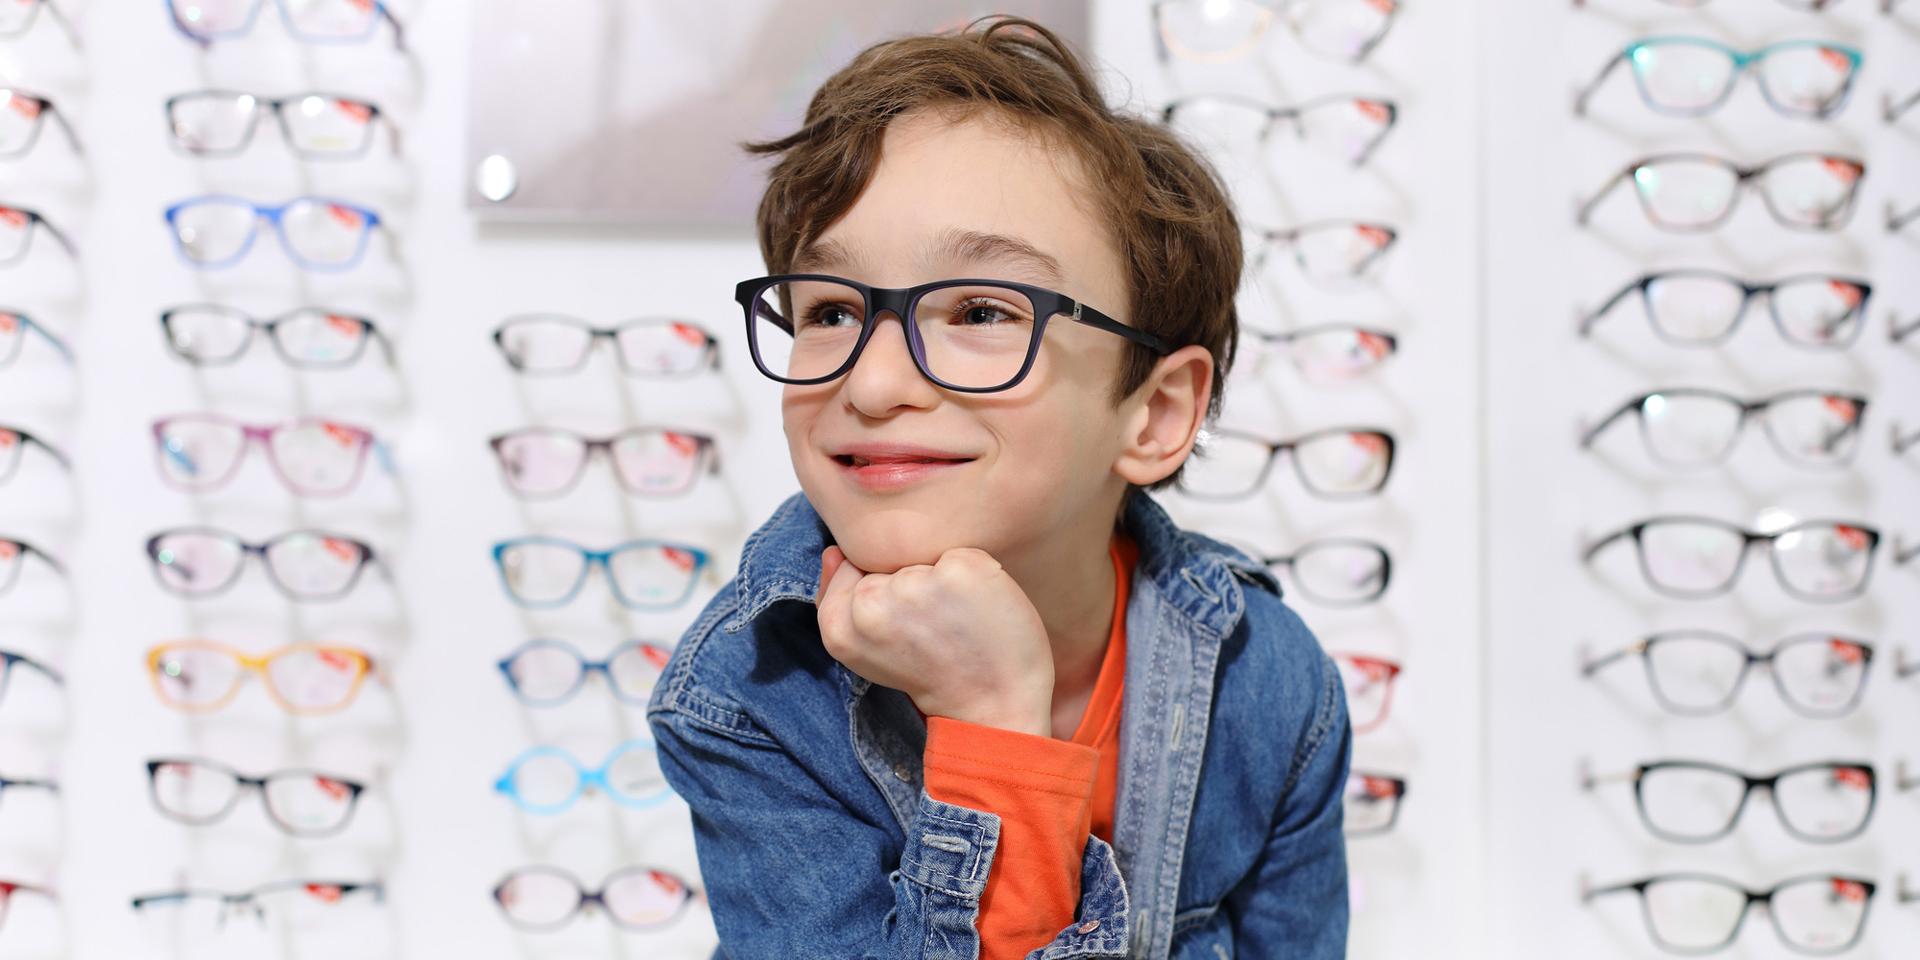 The right spectacle frames for children